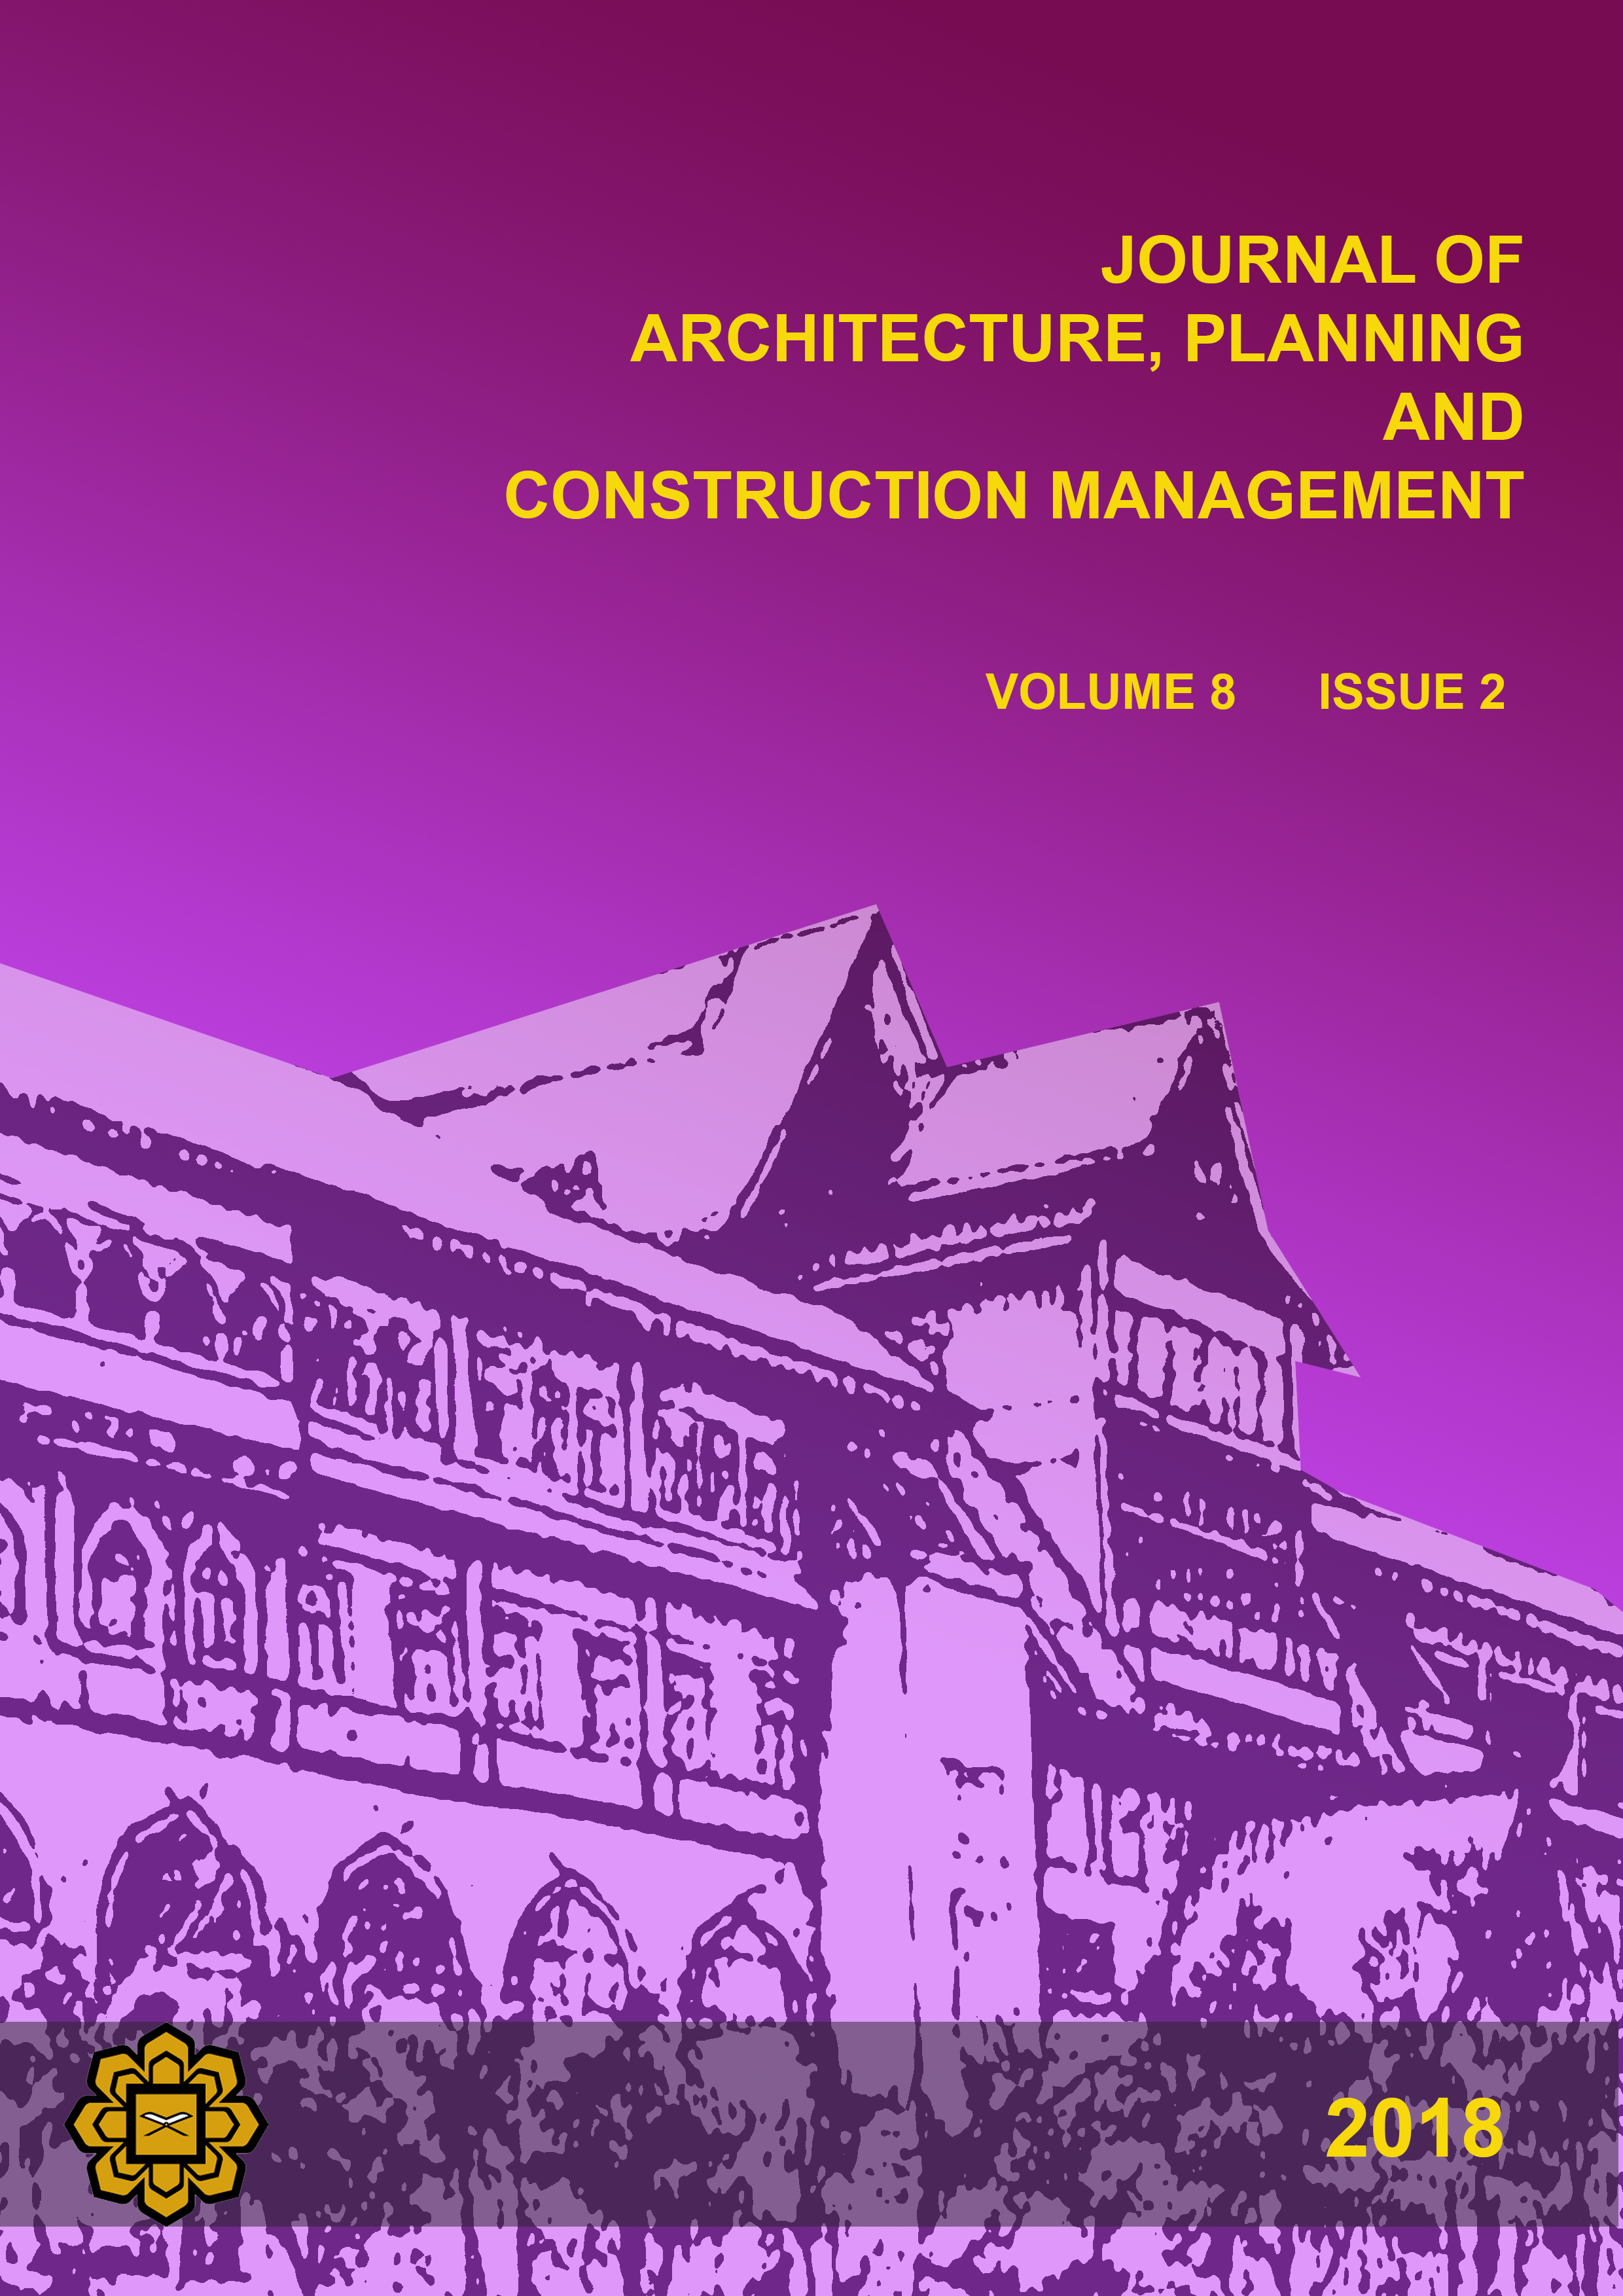 					View Vol. 8 No. 2 (2018): Journal of Architecture, Planning and Construction Management 
				